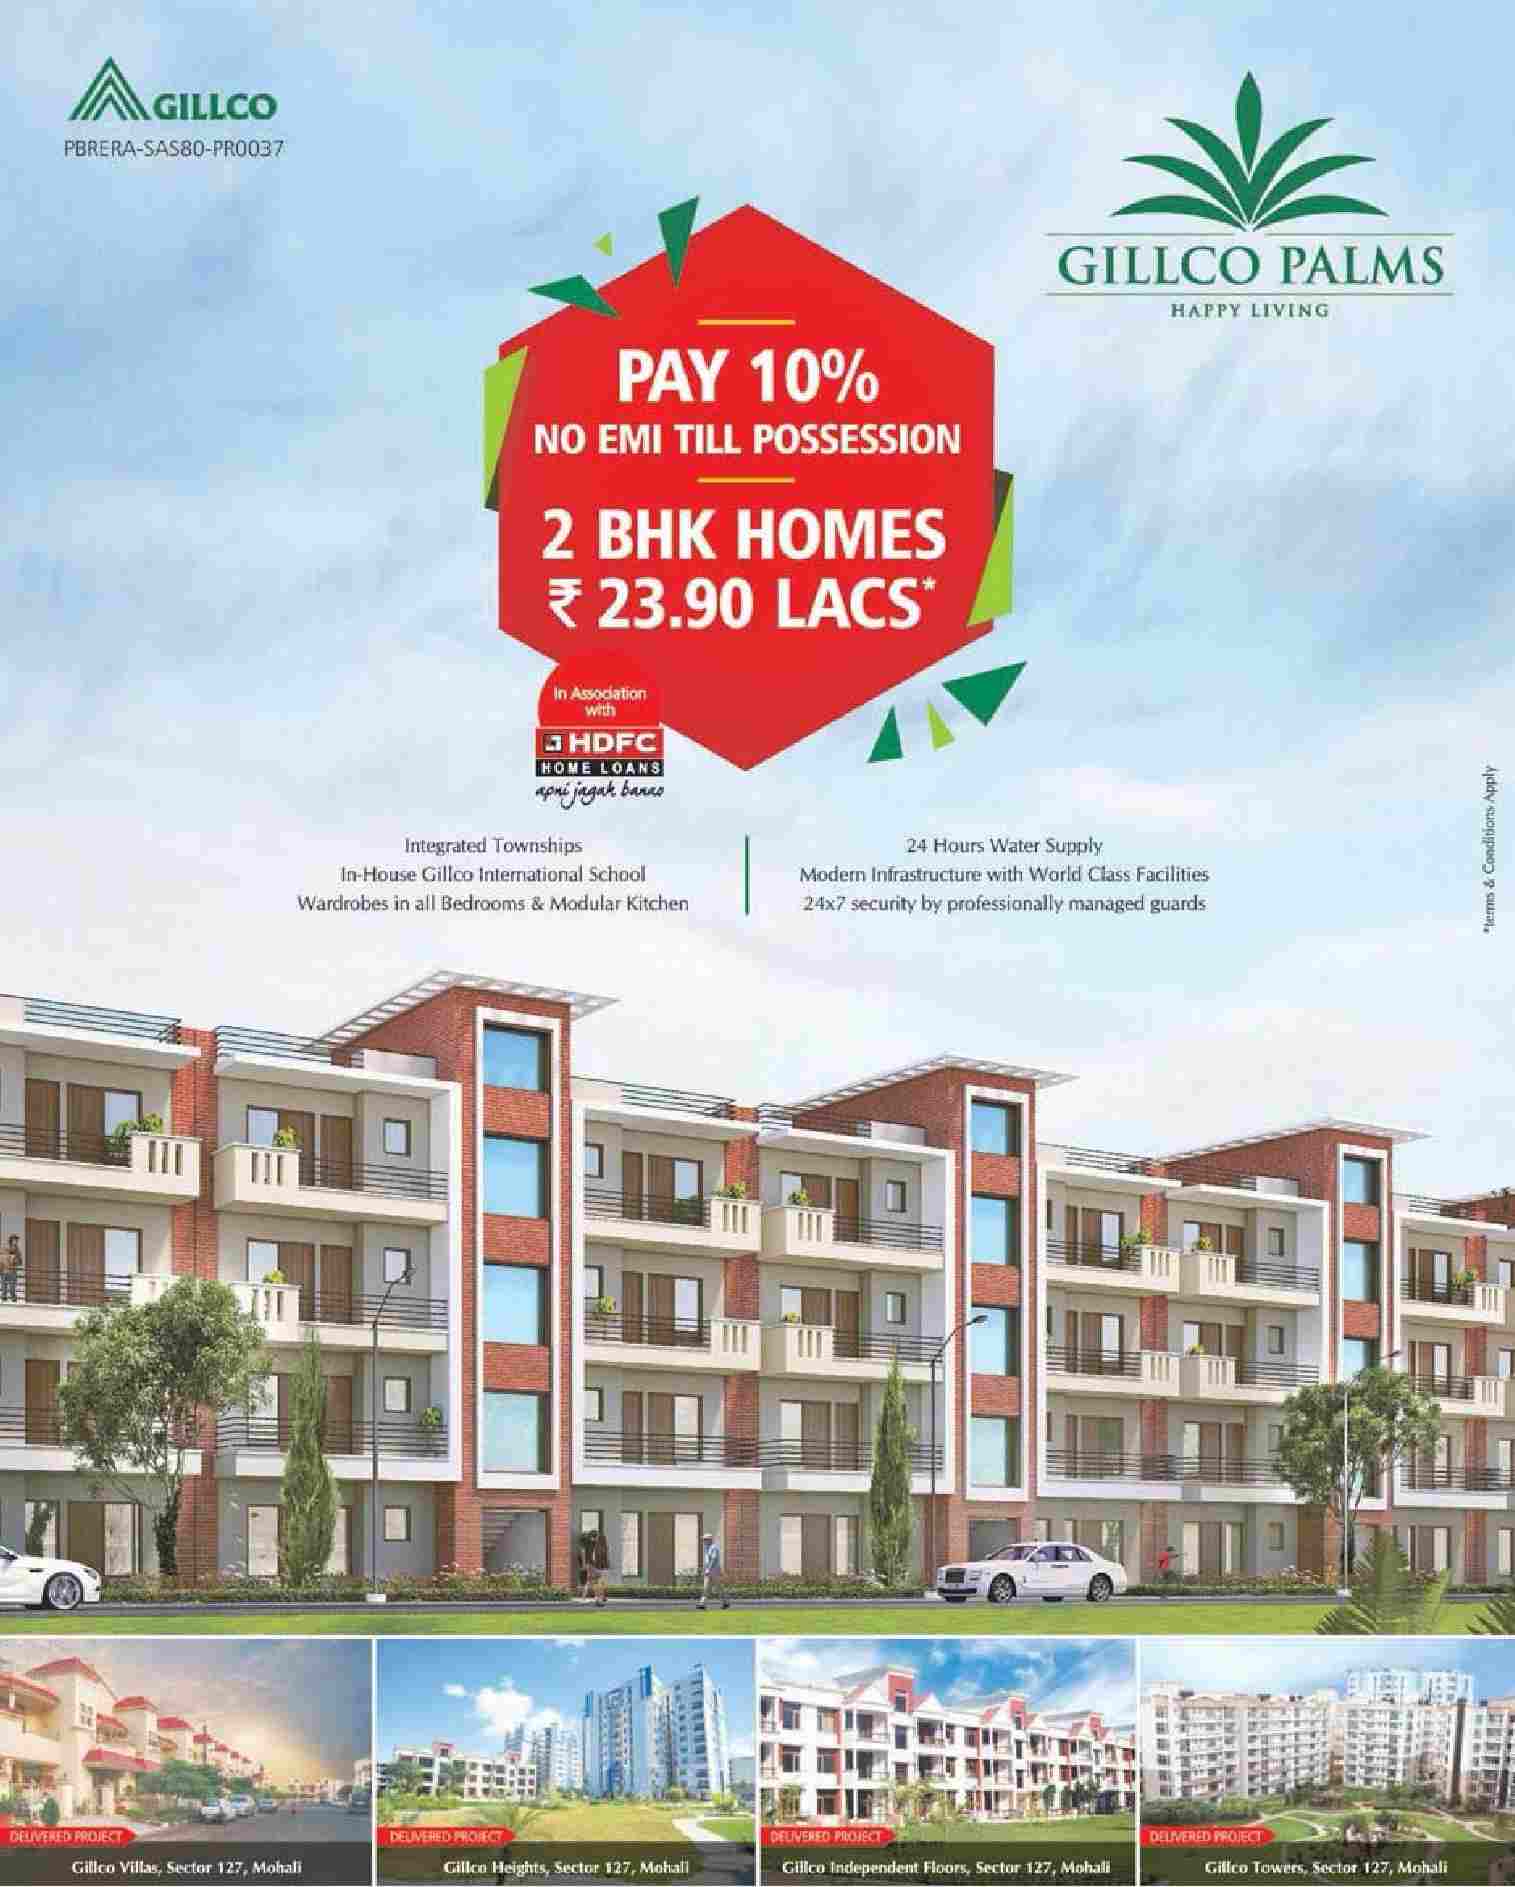 Reside in an integrated township at Gillco Palms in Mohali